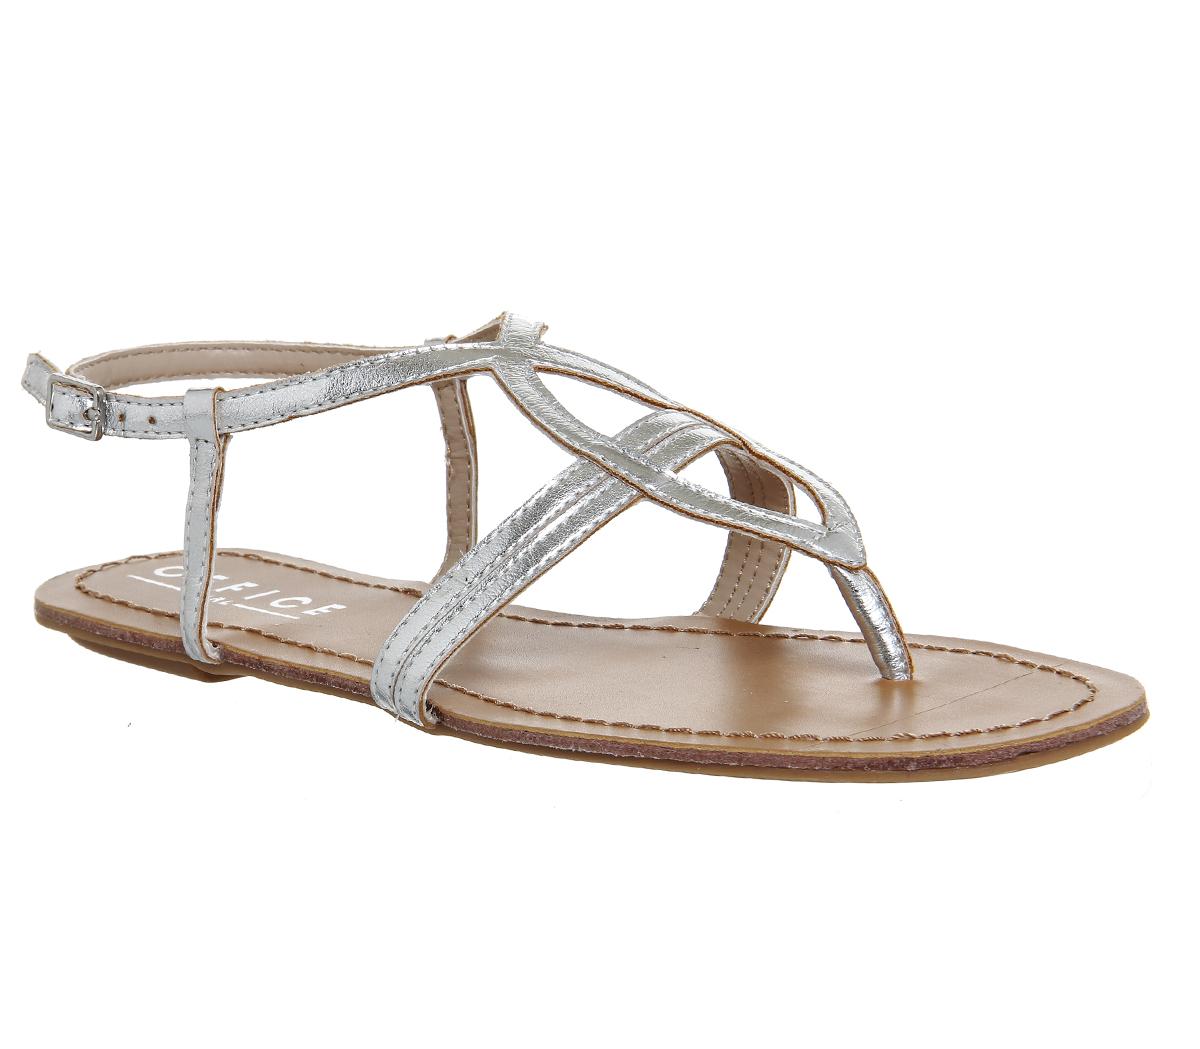 OFFICEBelieve Strappy SandalsSilver